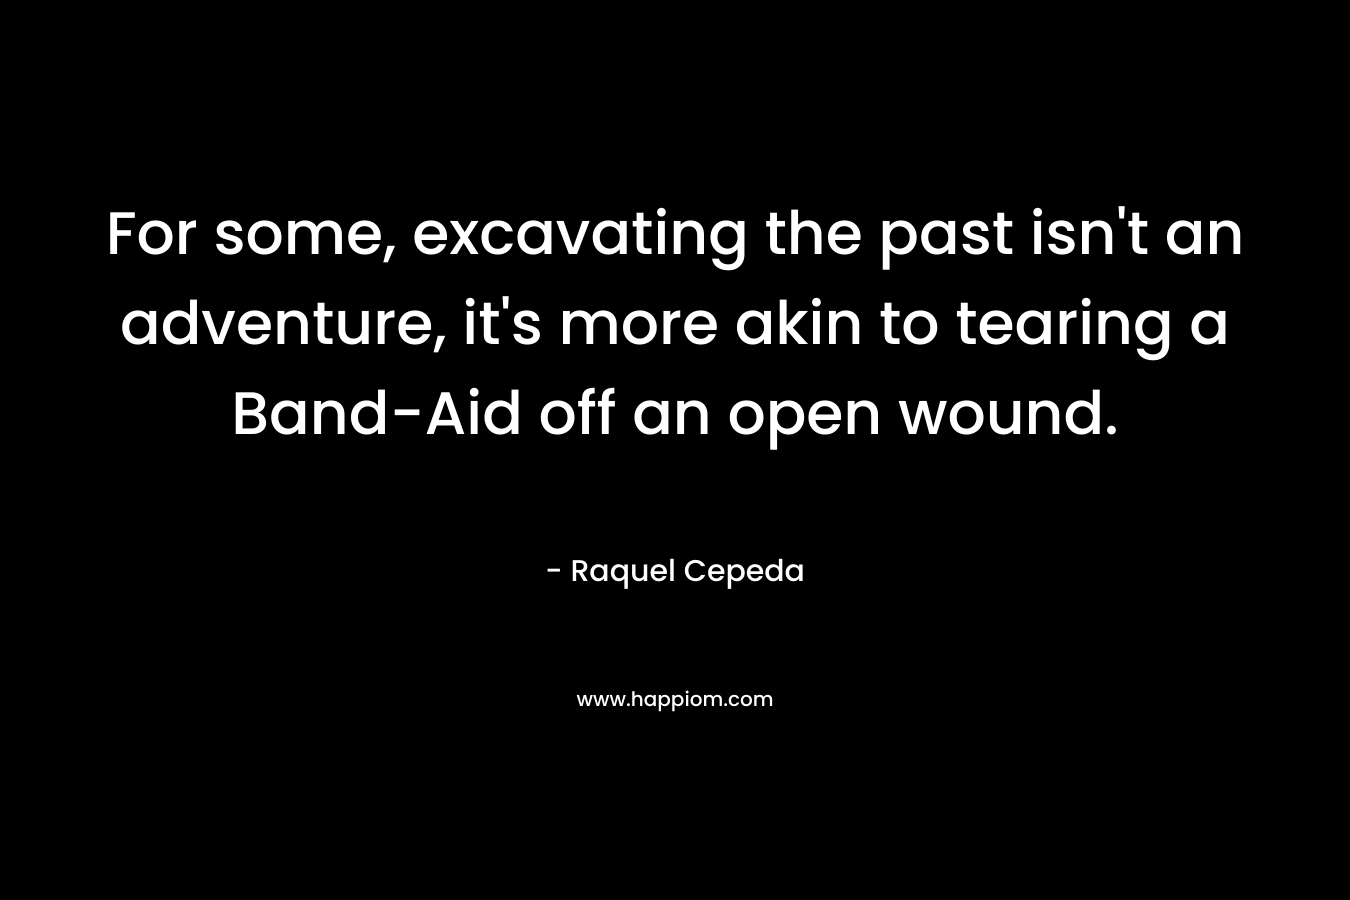 For some, excavating the past isn't an adventure, it's more akin to tearing a Band-Aid off an open wound.